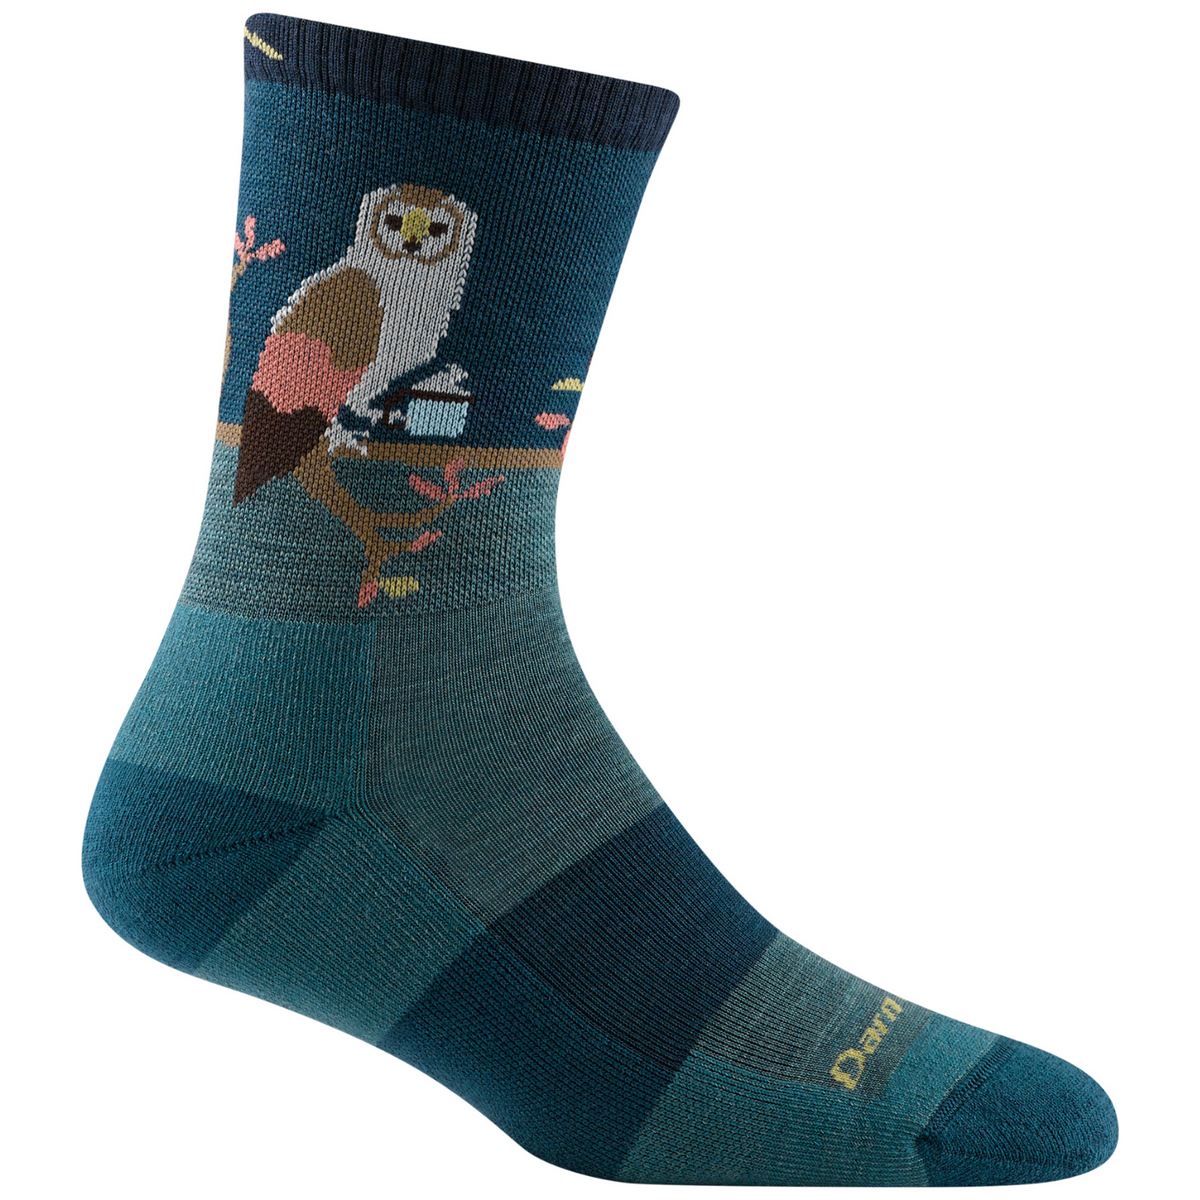 Darn Tough 5001 Critter Club Micro Crew Lightweight Hiking Women&#39;s Sock featuring teal sock with owl holding a cup of coffee on display foot